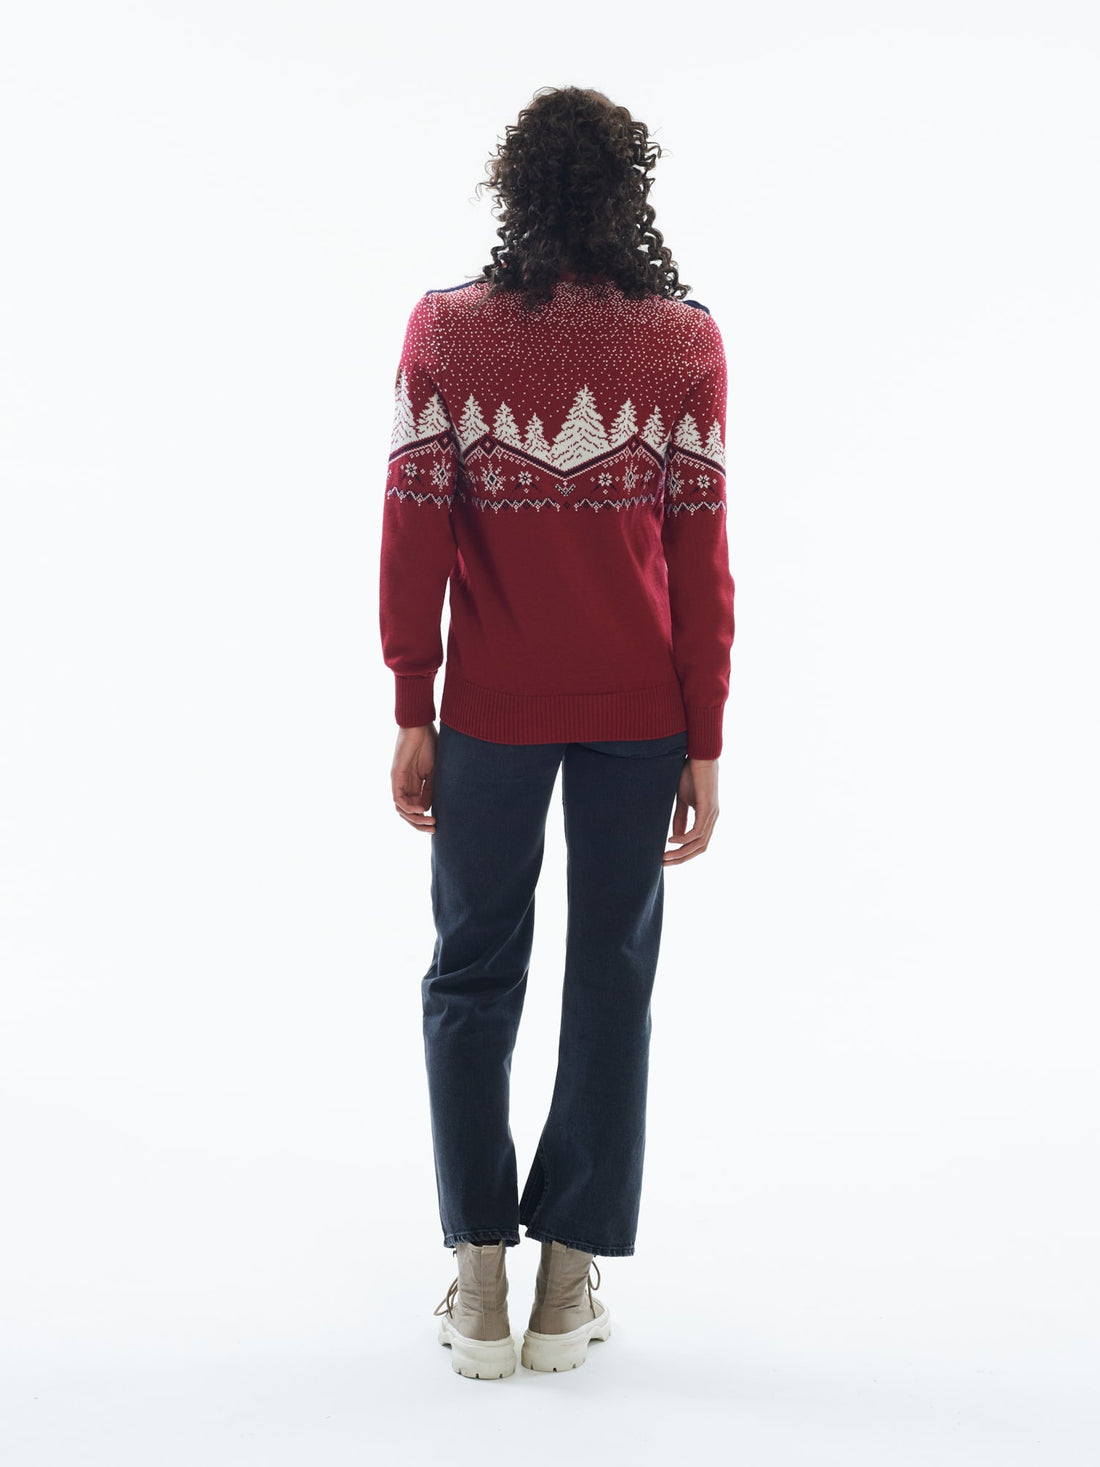 Dale of Norway - Christmas Sweater - Red